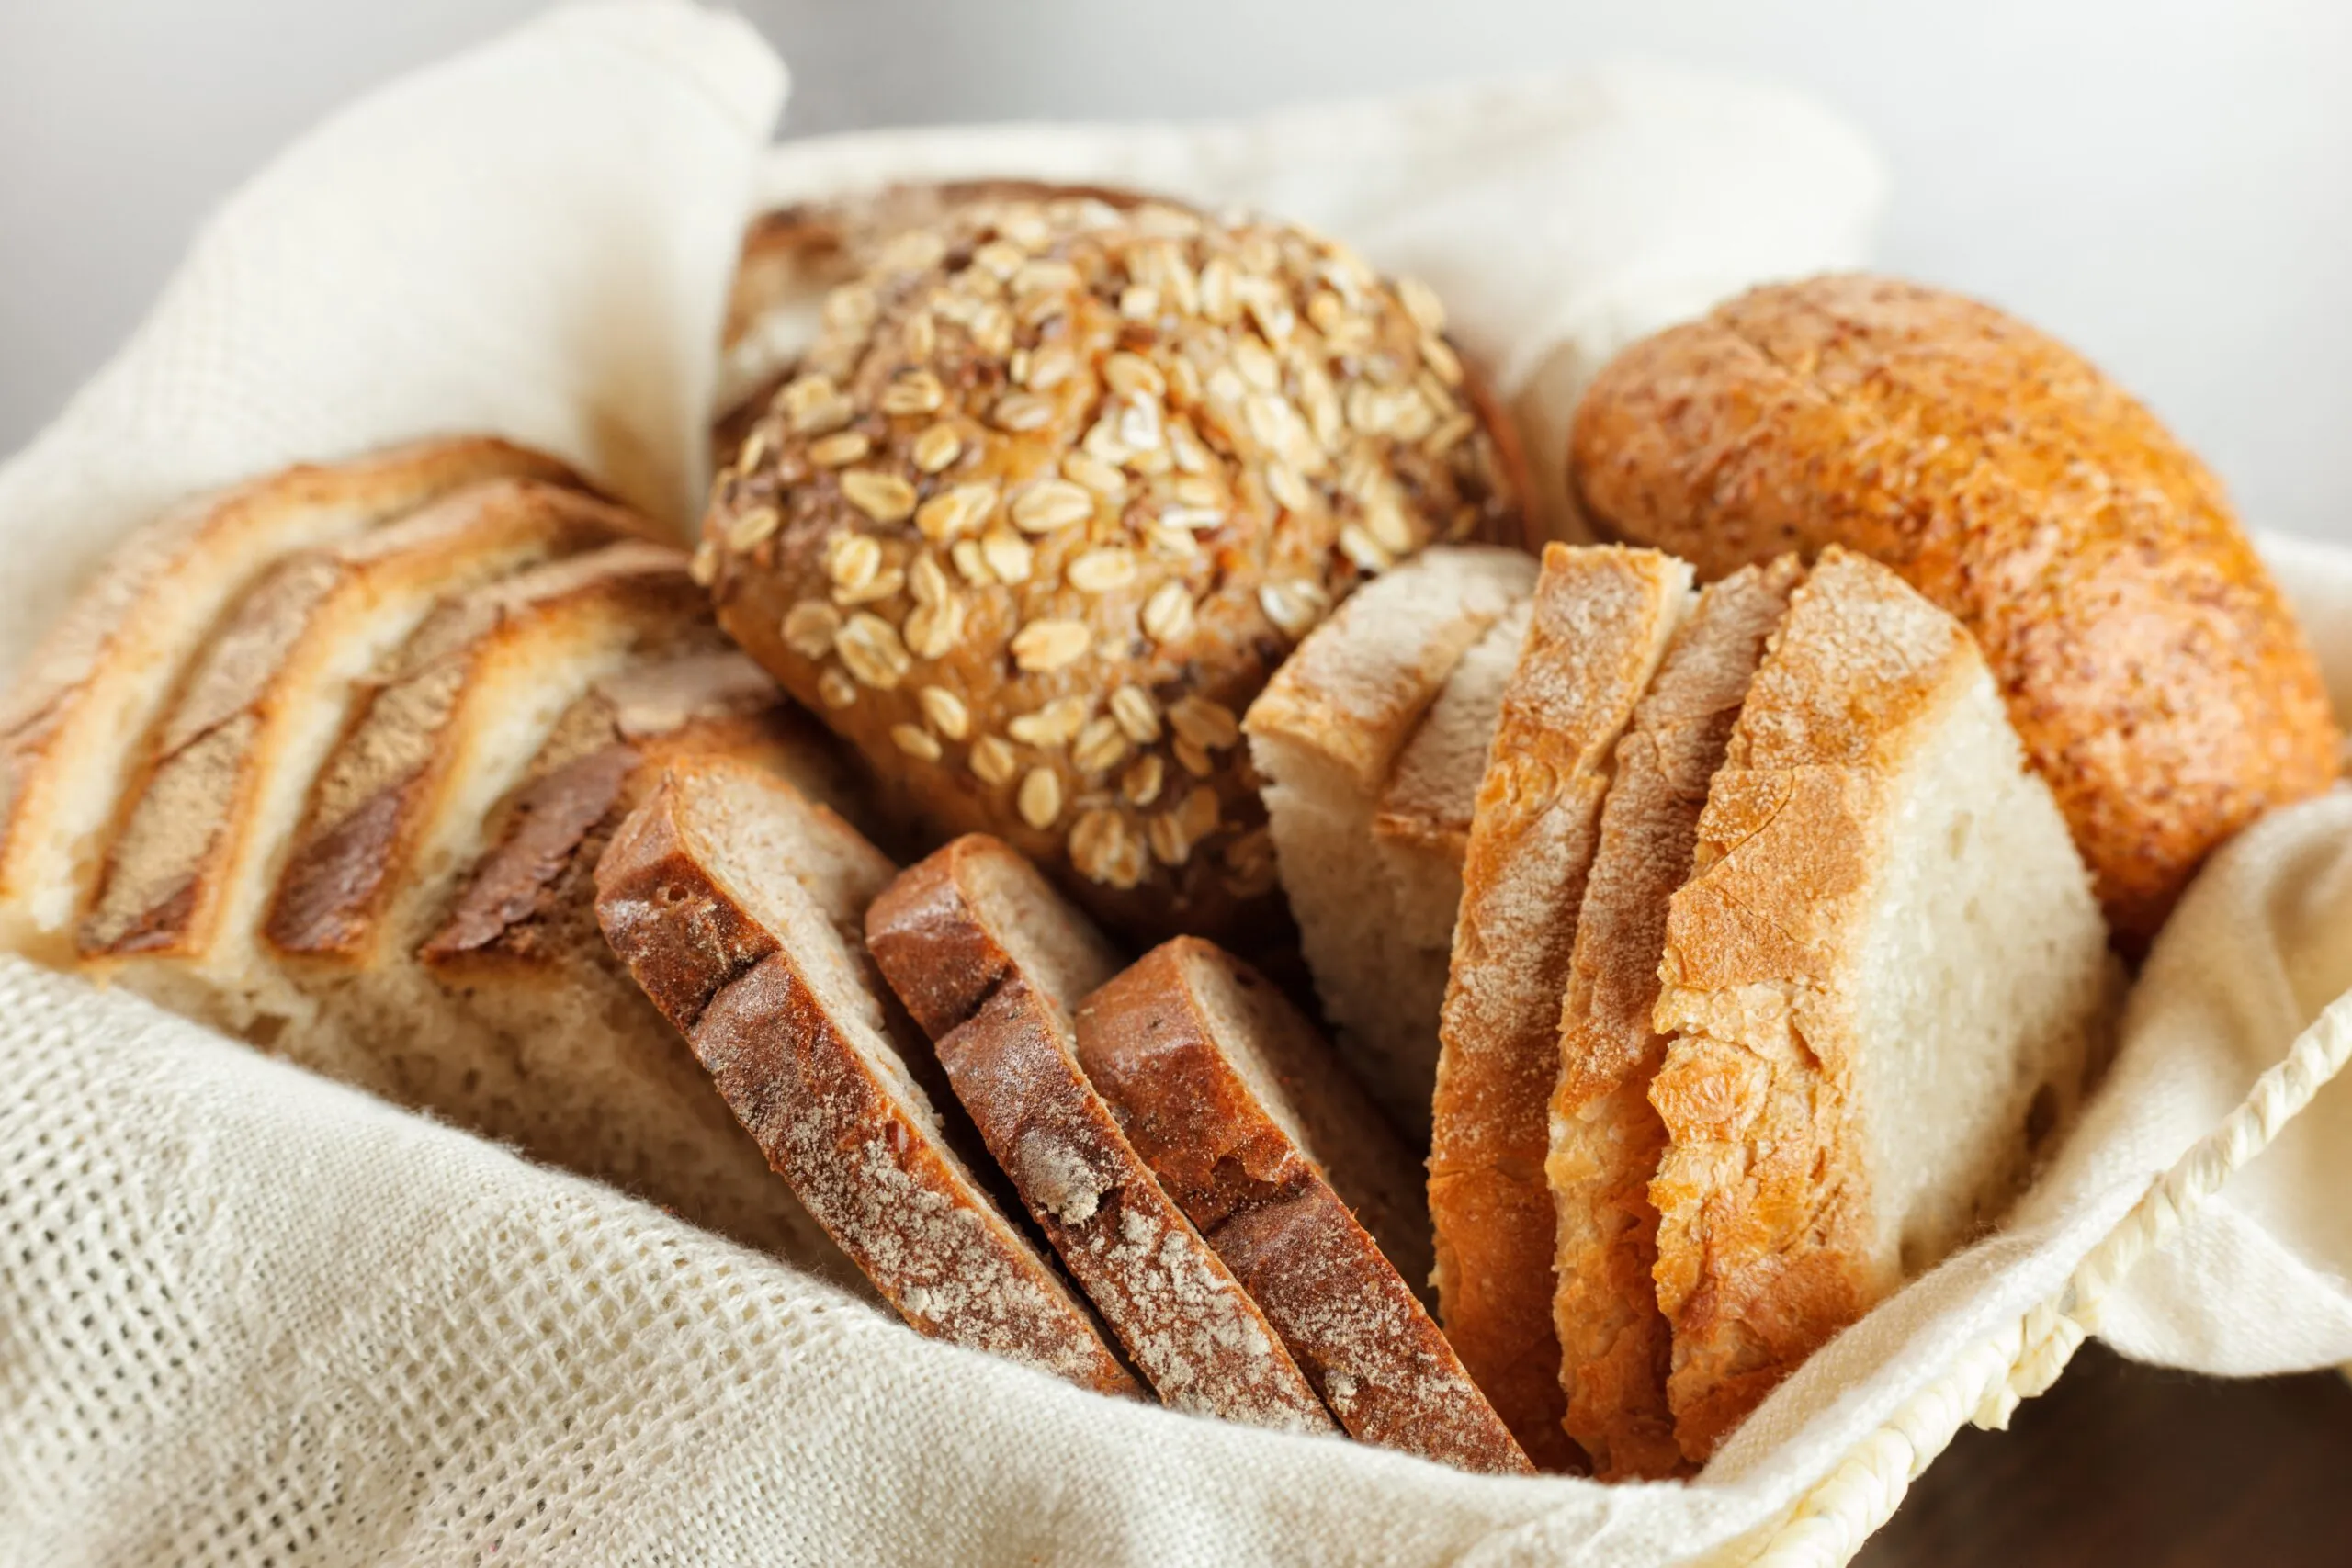 How Different Types of Bread Affect Your Health